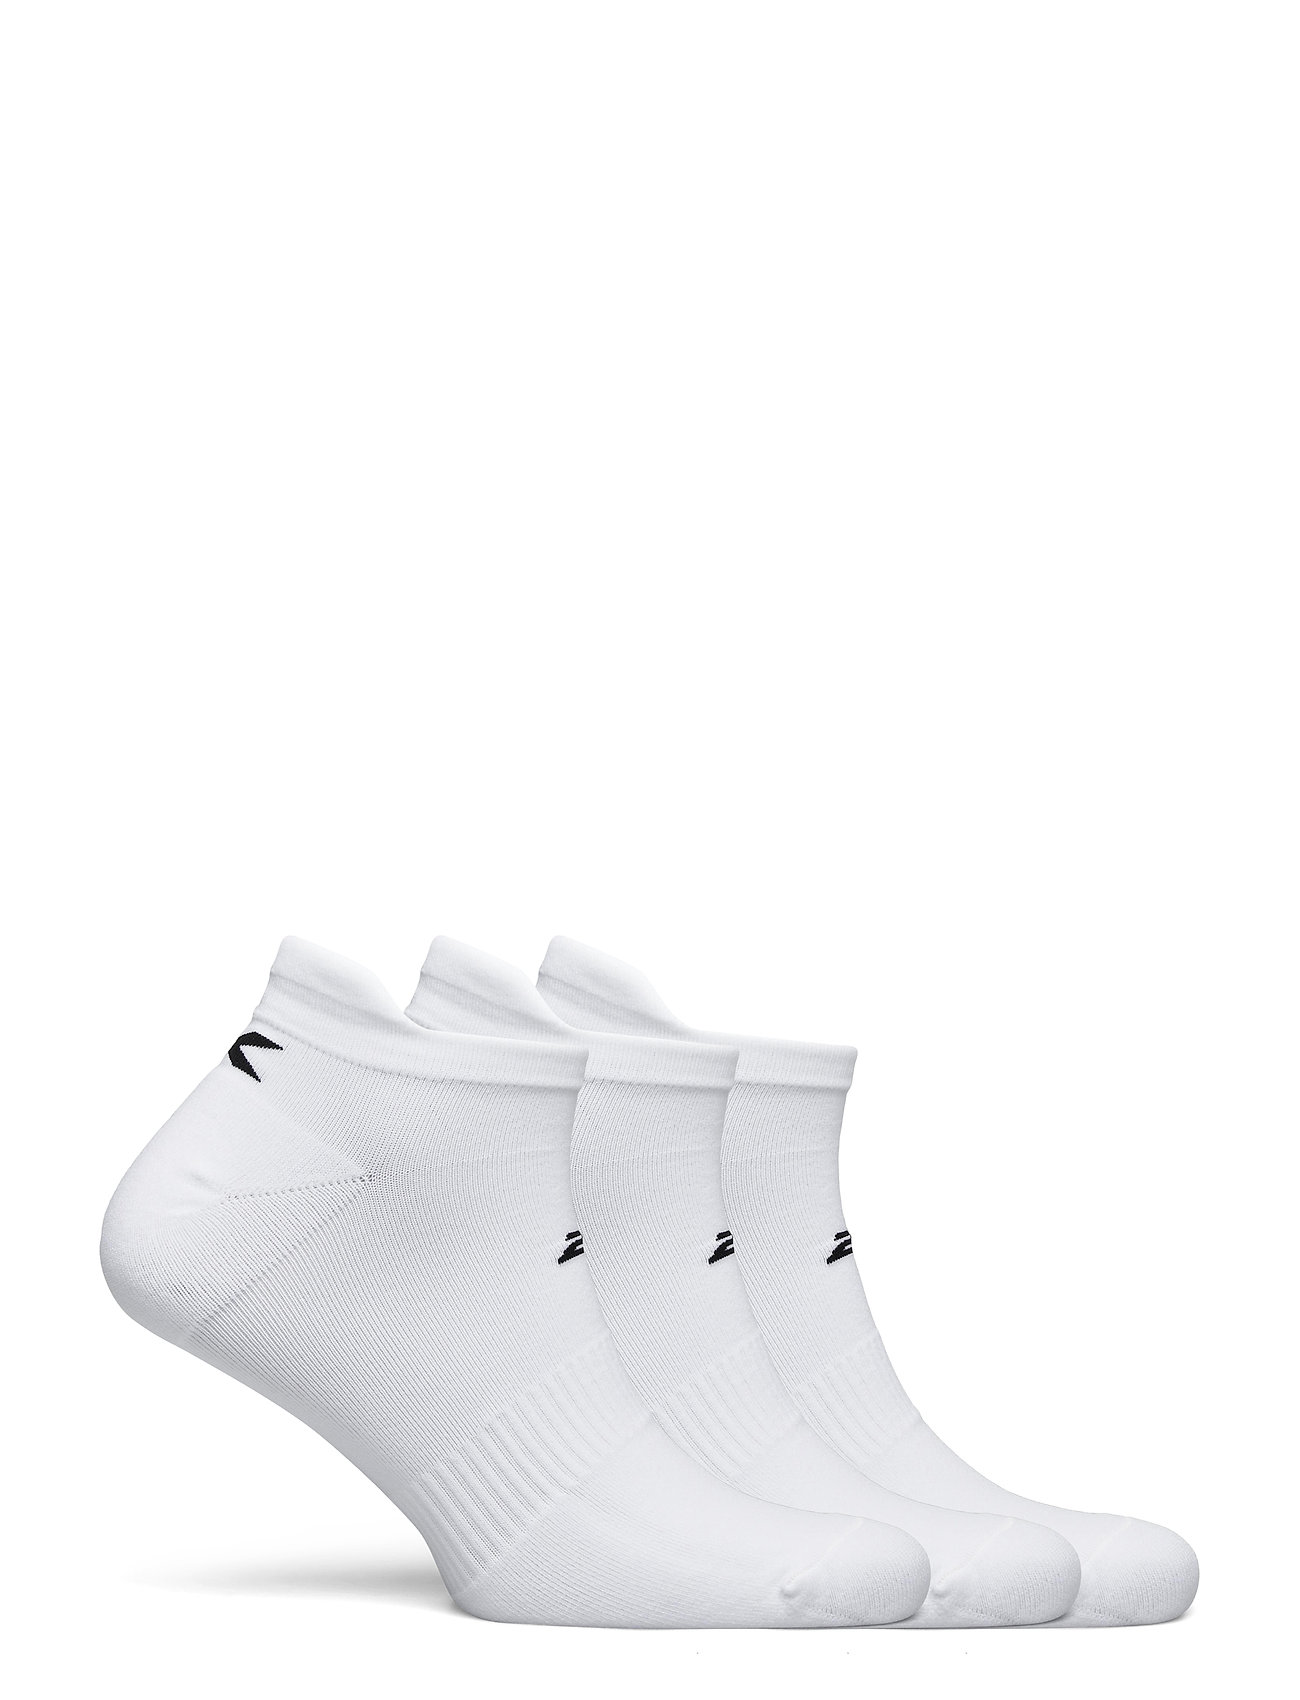 2XU - ANKLE SOCKS 3 PACK - lowest prices - white/black - 1